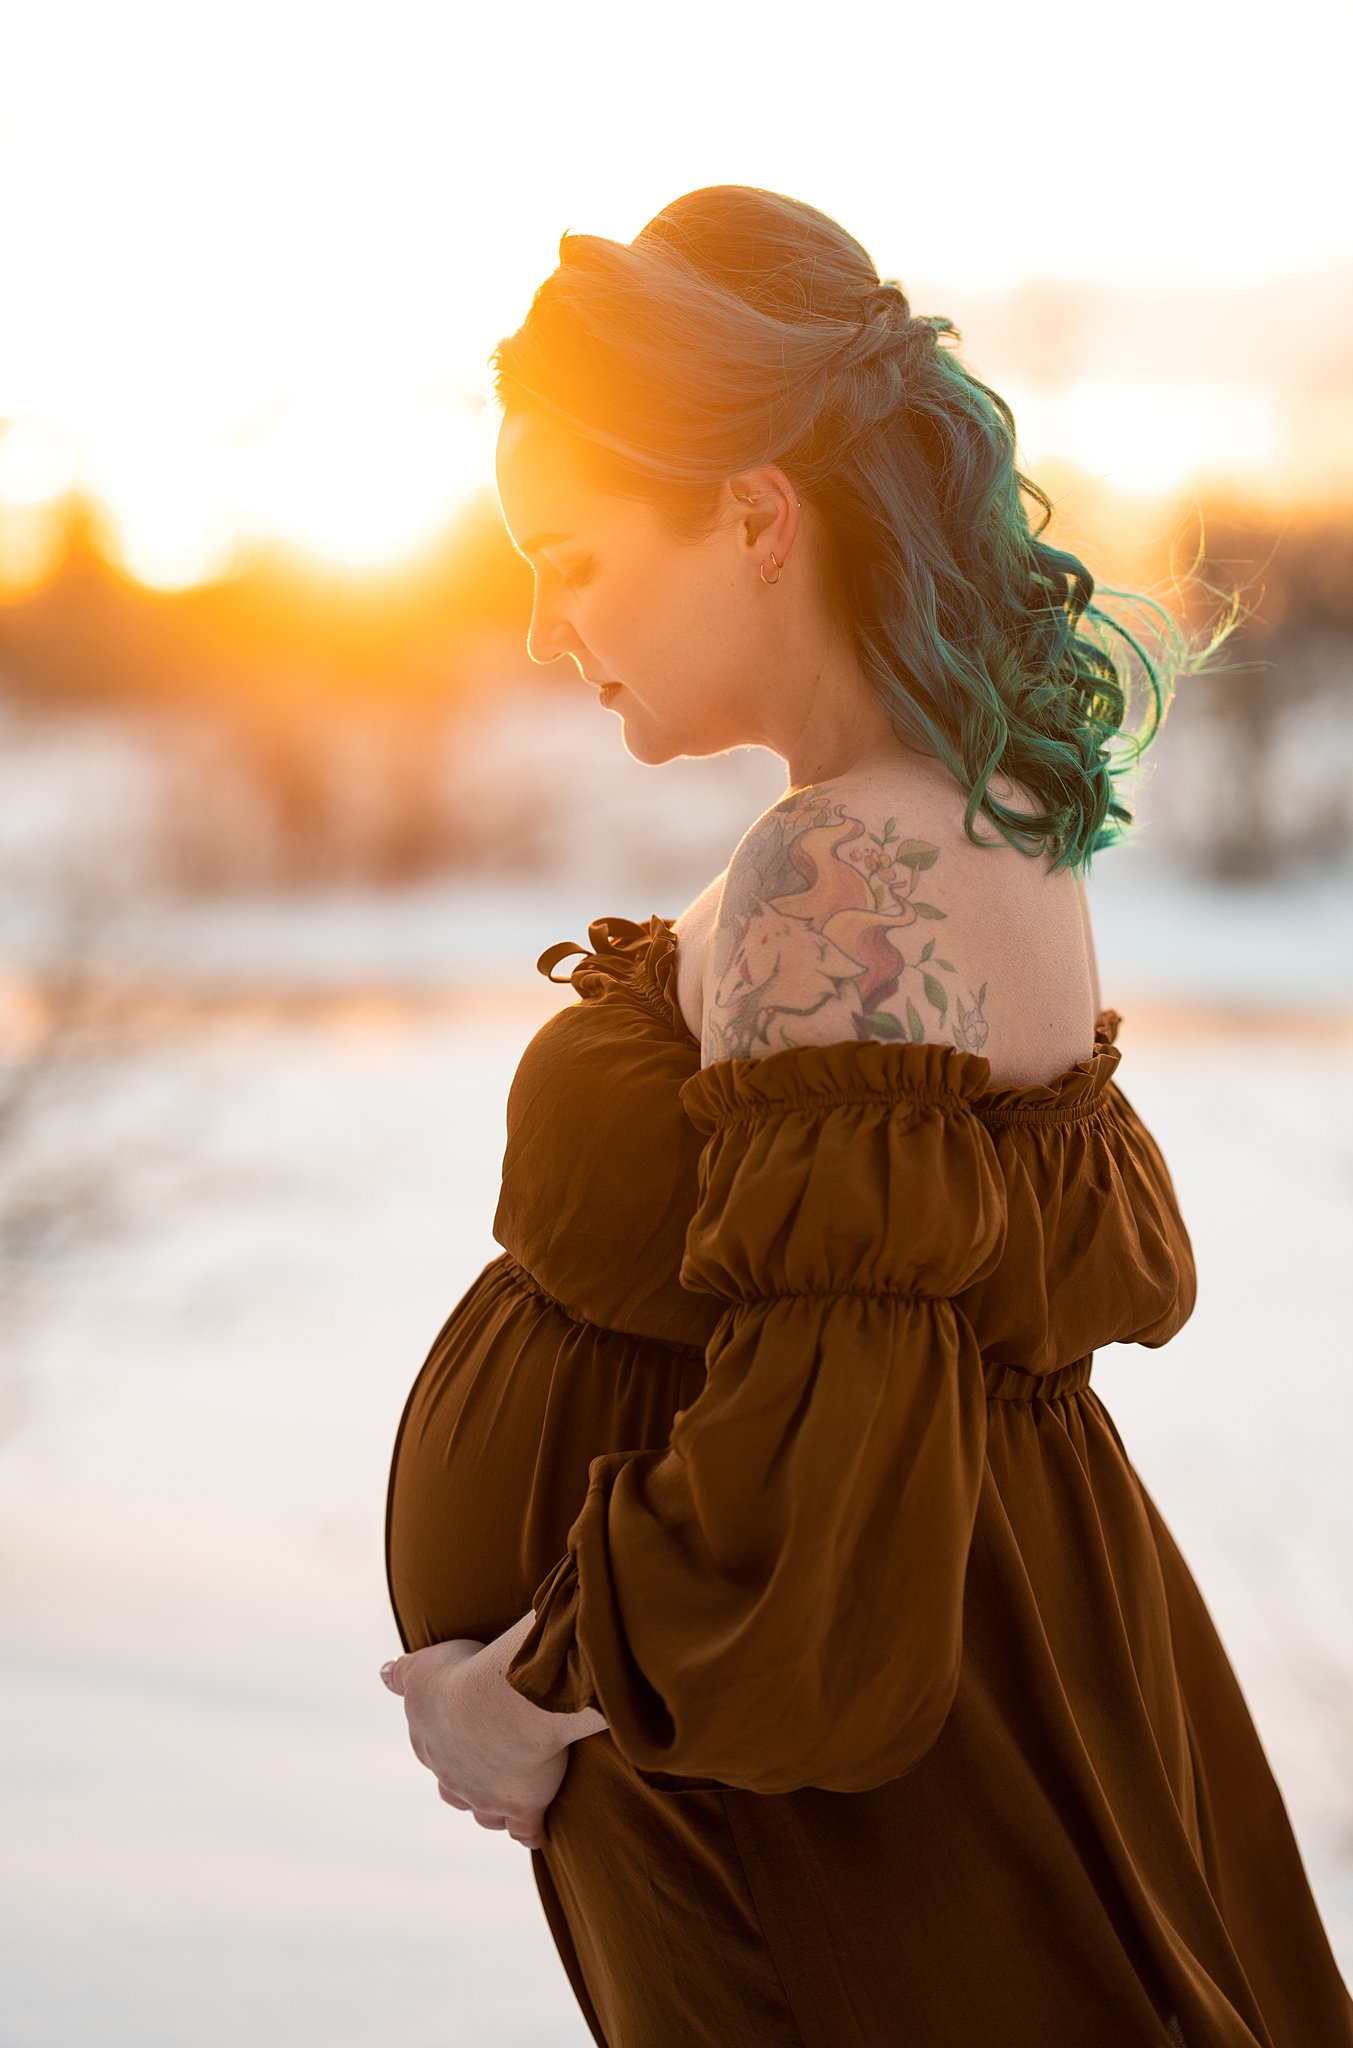 Mother to be looks down at her bump in a snowy field at sunset